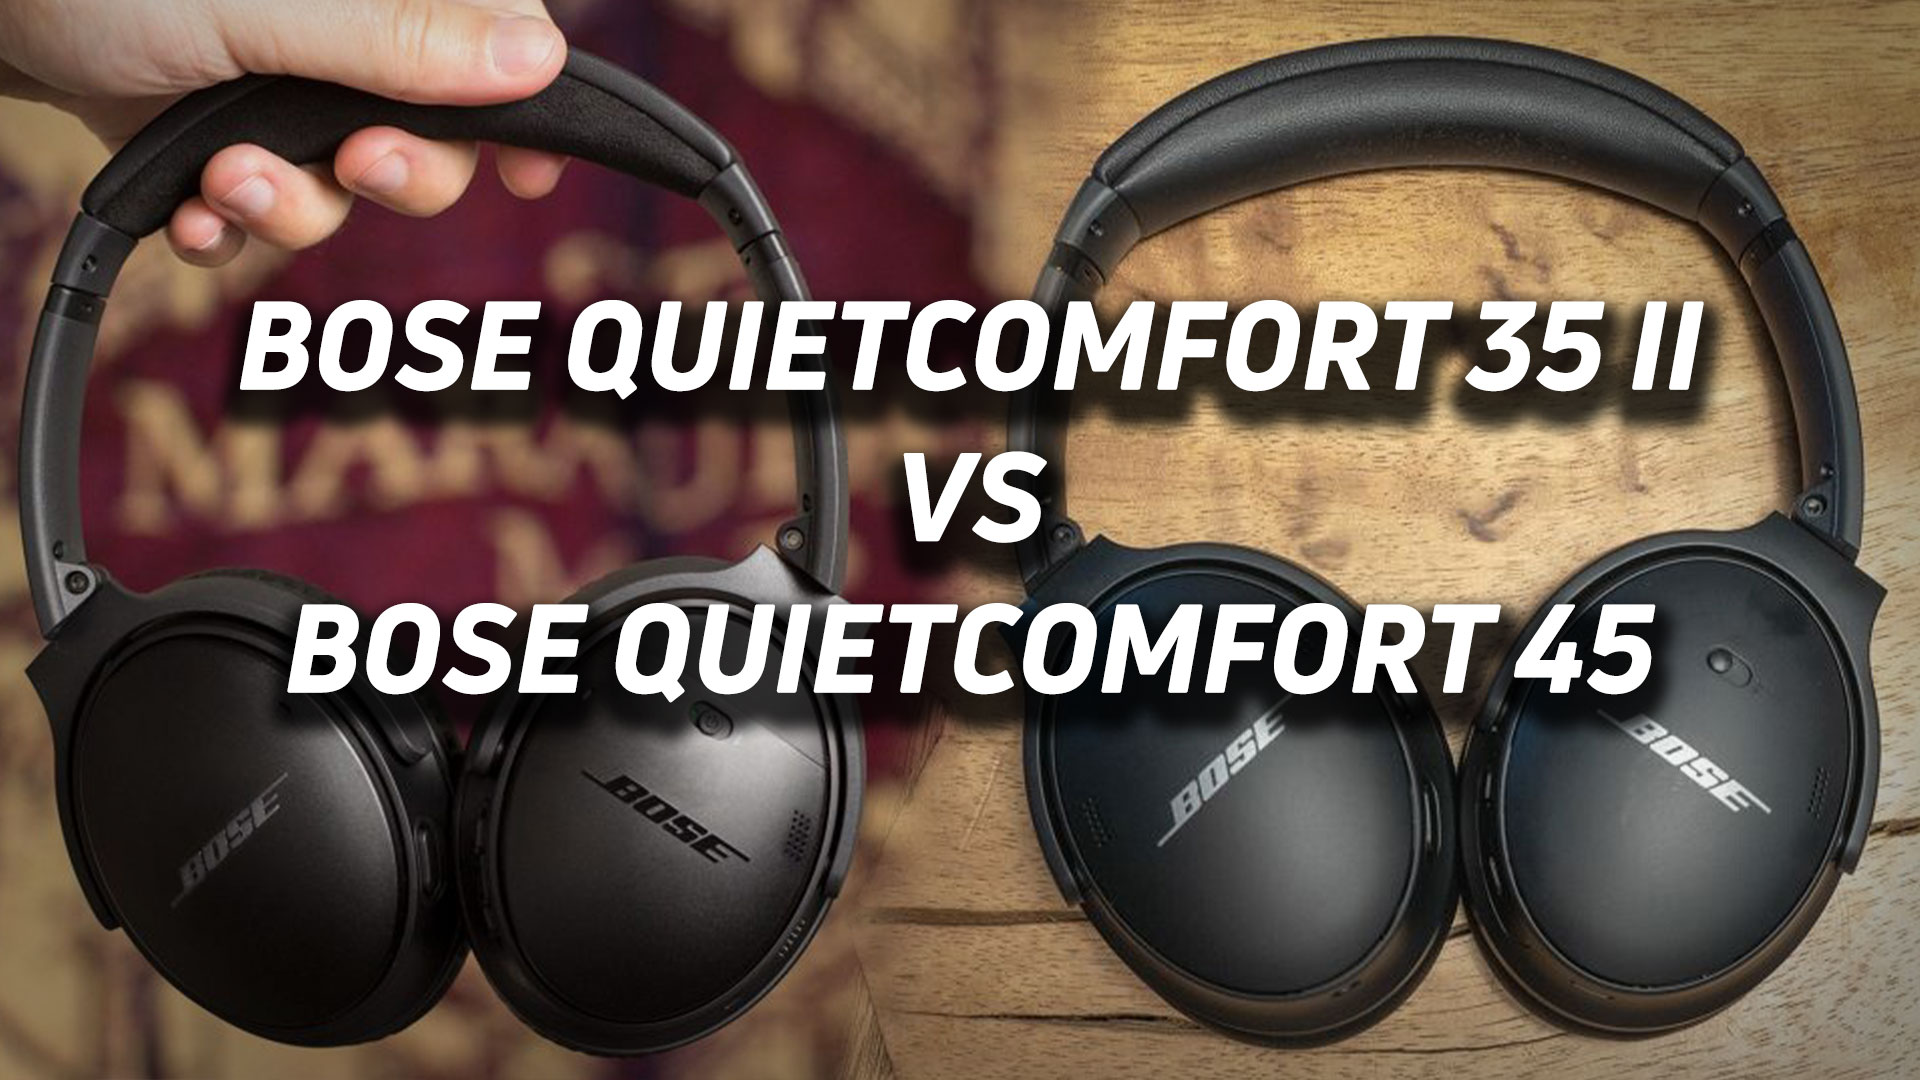 difference in price and qaulity of QC45-SE VS QC45? : r/bose